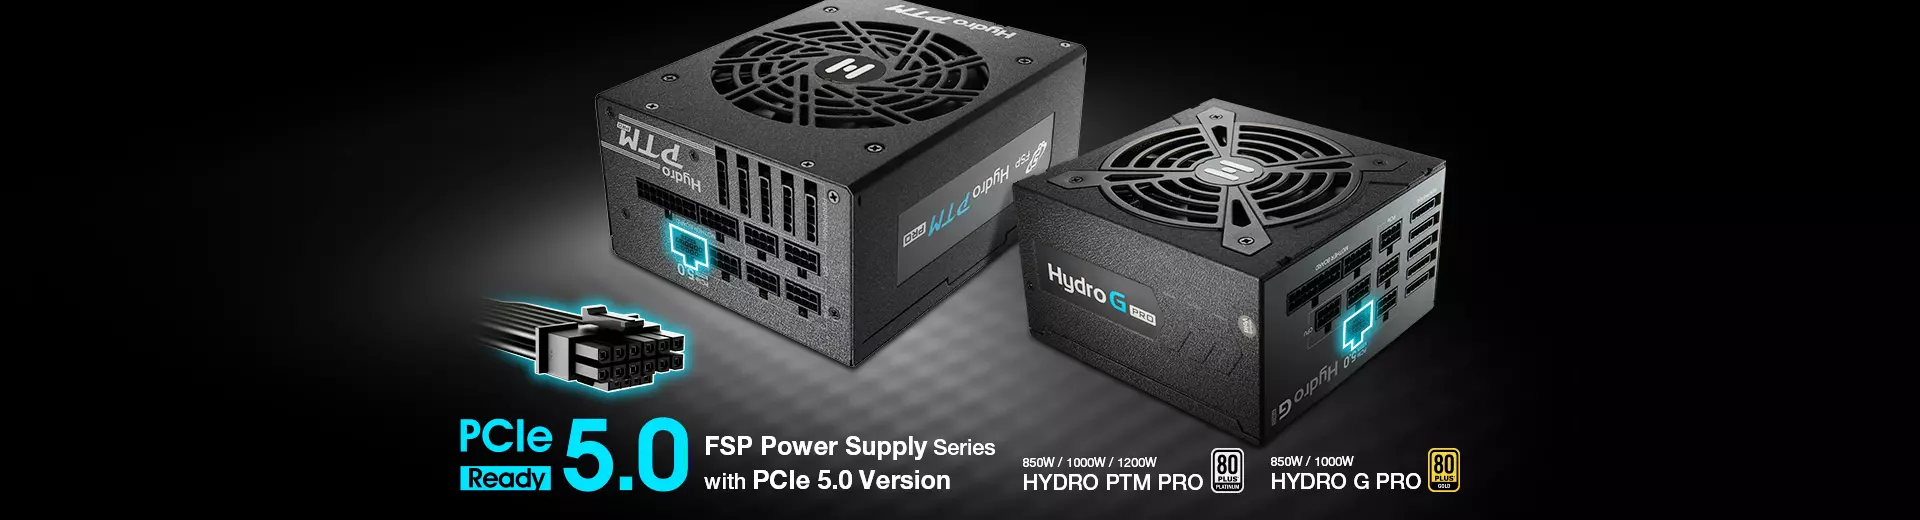 FSP Group Introduces FSP Hydro G Pro and Hydro PTM Pro PSUs